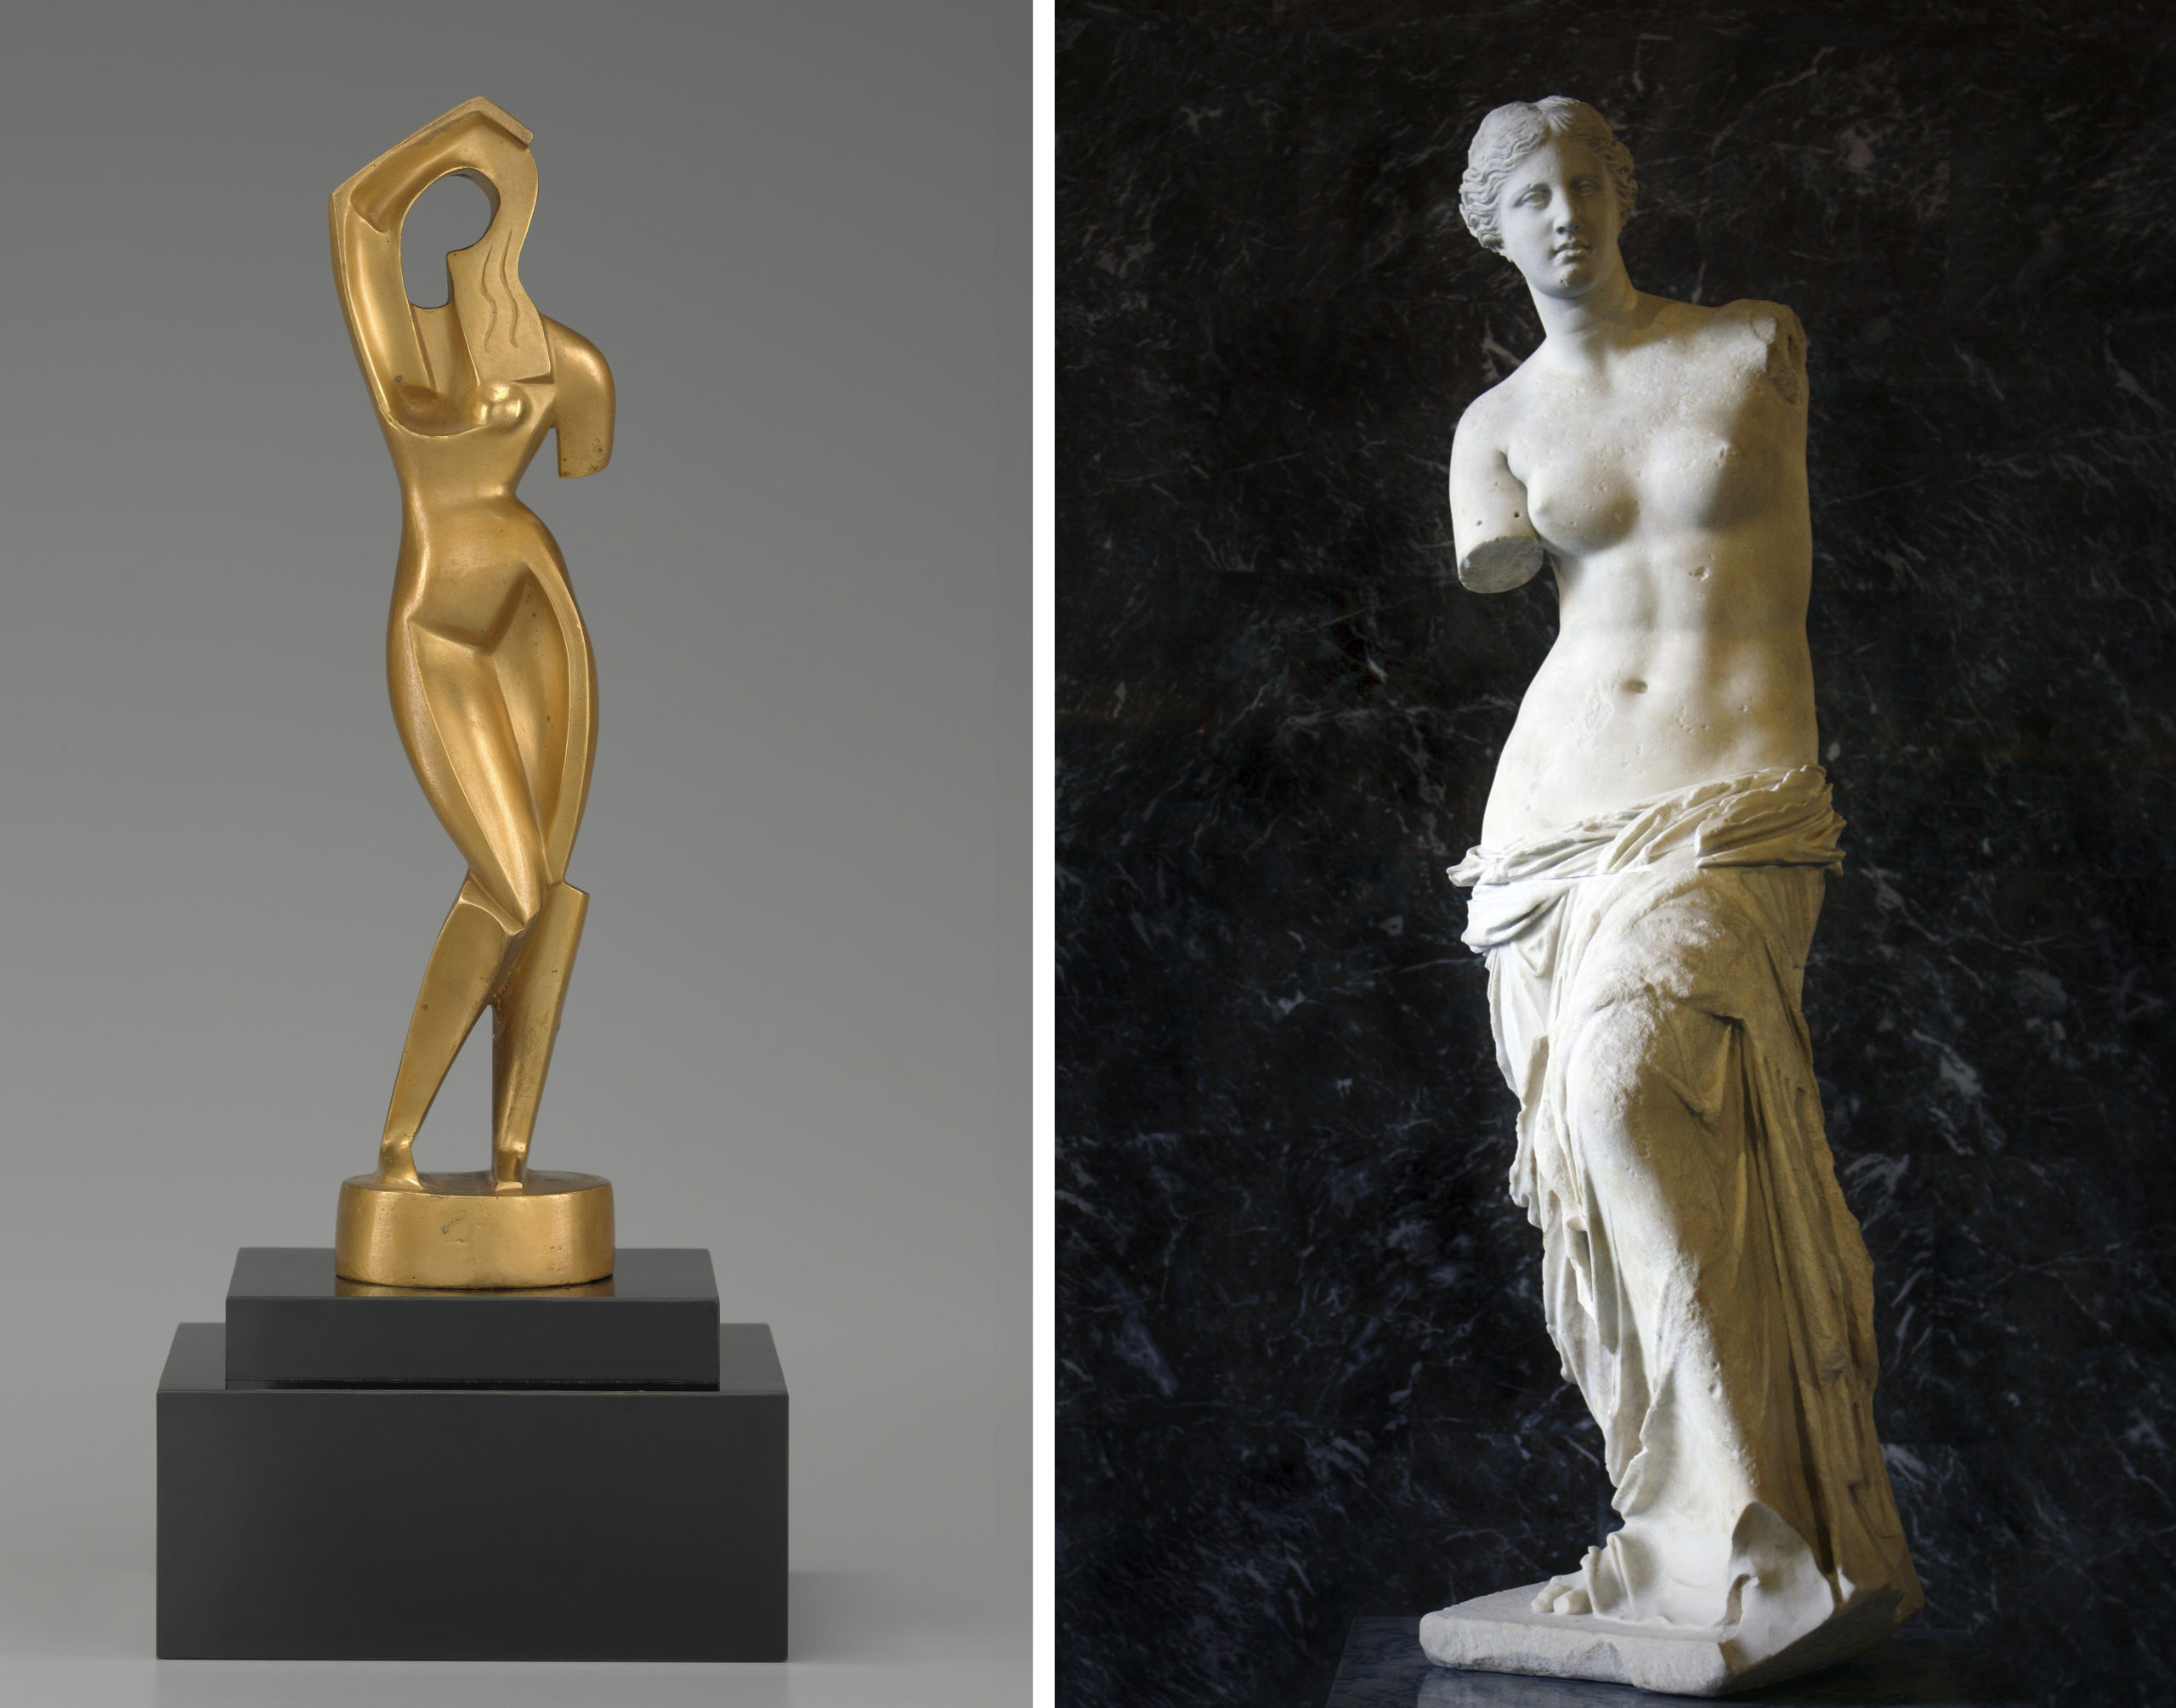 Left: Alexander Archipenko, Woman Combing Her Hair, 1915, bronze, 34 7/8 inches tall (Yale University Art Gallery); Right: Aphrodite, known as the “Venus de Milo”, c. 100 BC, marble, 2.02 m. tall (photo: Mattgirling, CC BY 3.0)